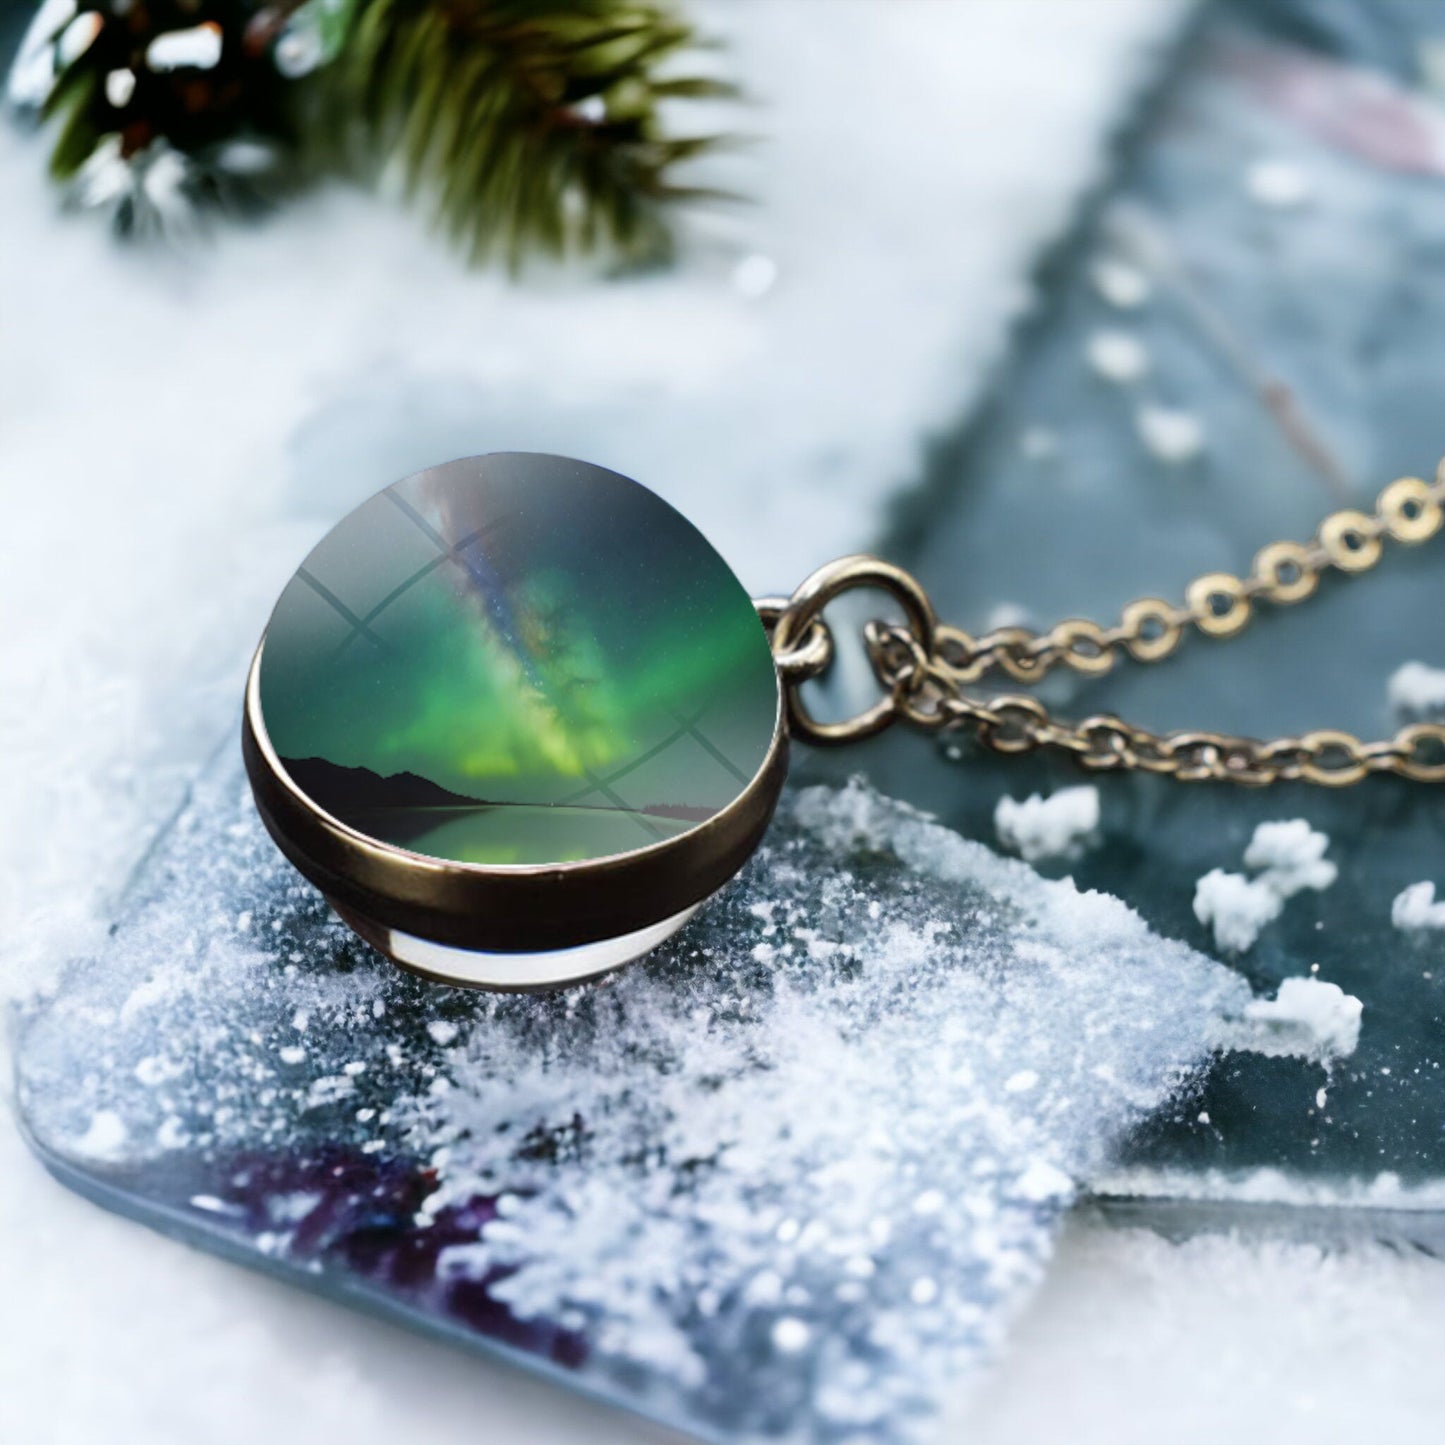 Unique Aurora Borealis Silver Necklace - Northern Light Jewelry - Double Side Glass Ball Pendent Necklace - Perfect Aurora Lovers Gift 32